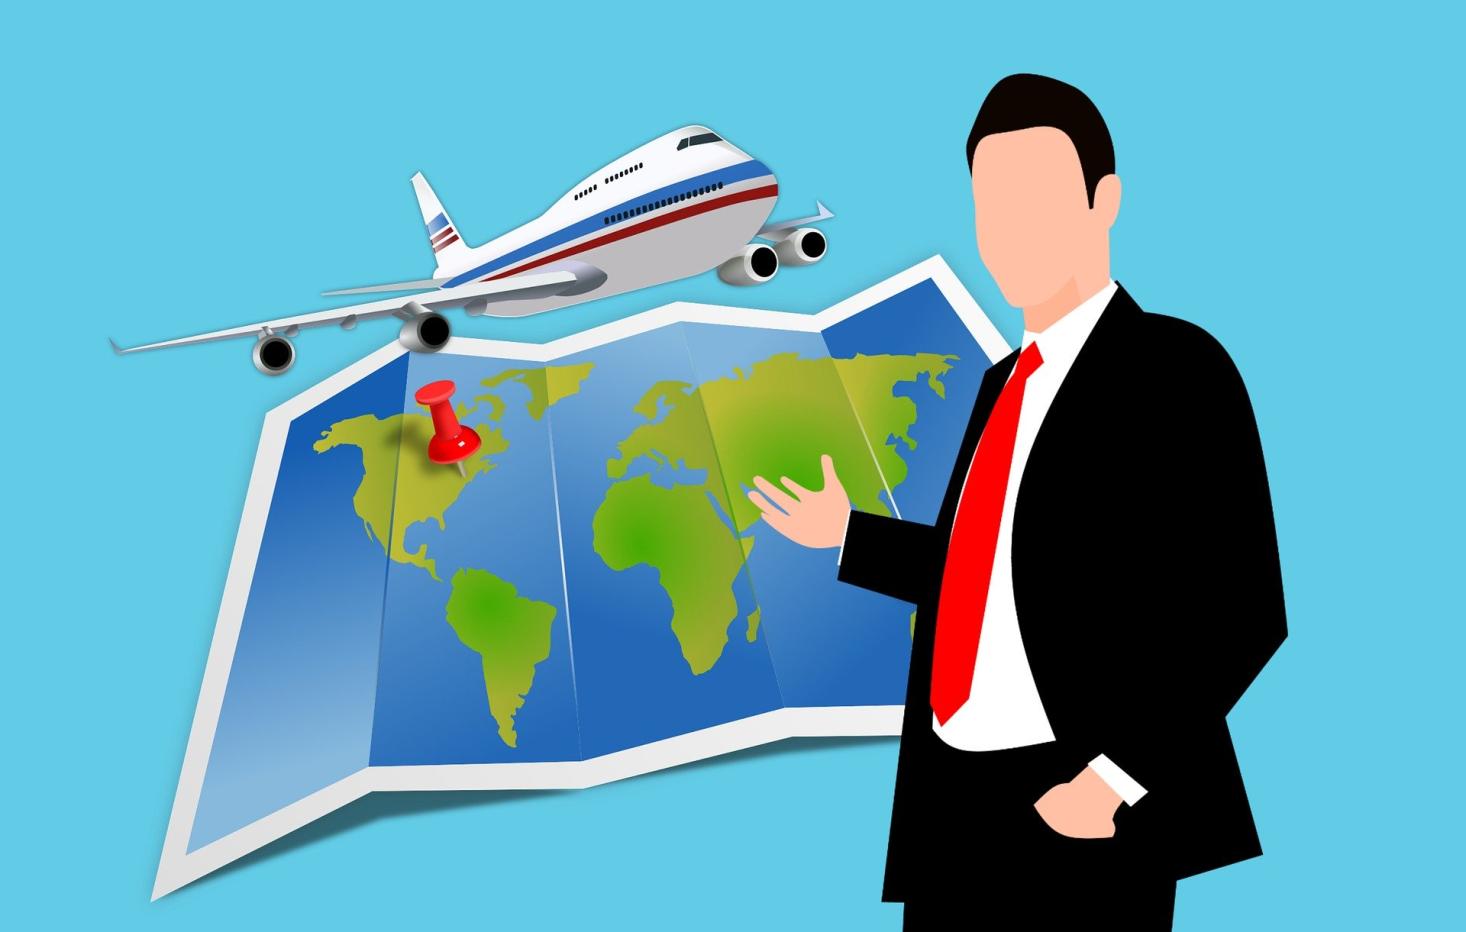 What Are Some Tips for Using a Discount Travel Agency?